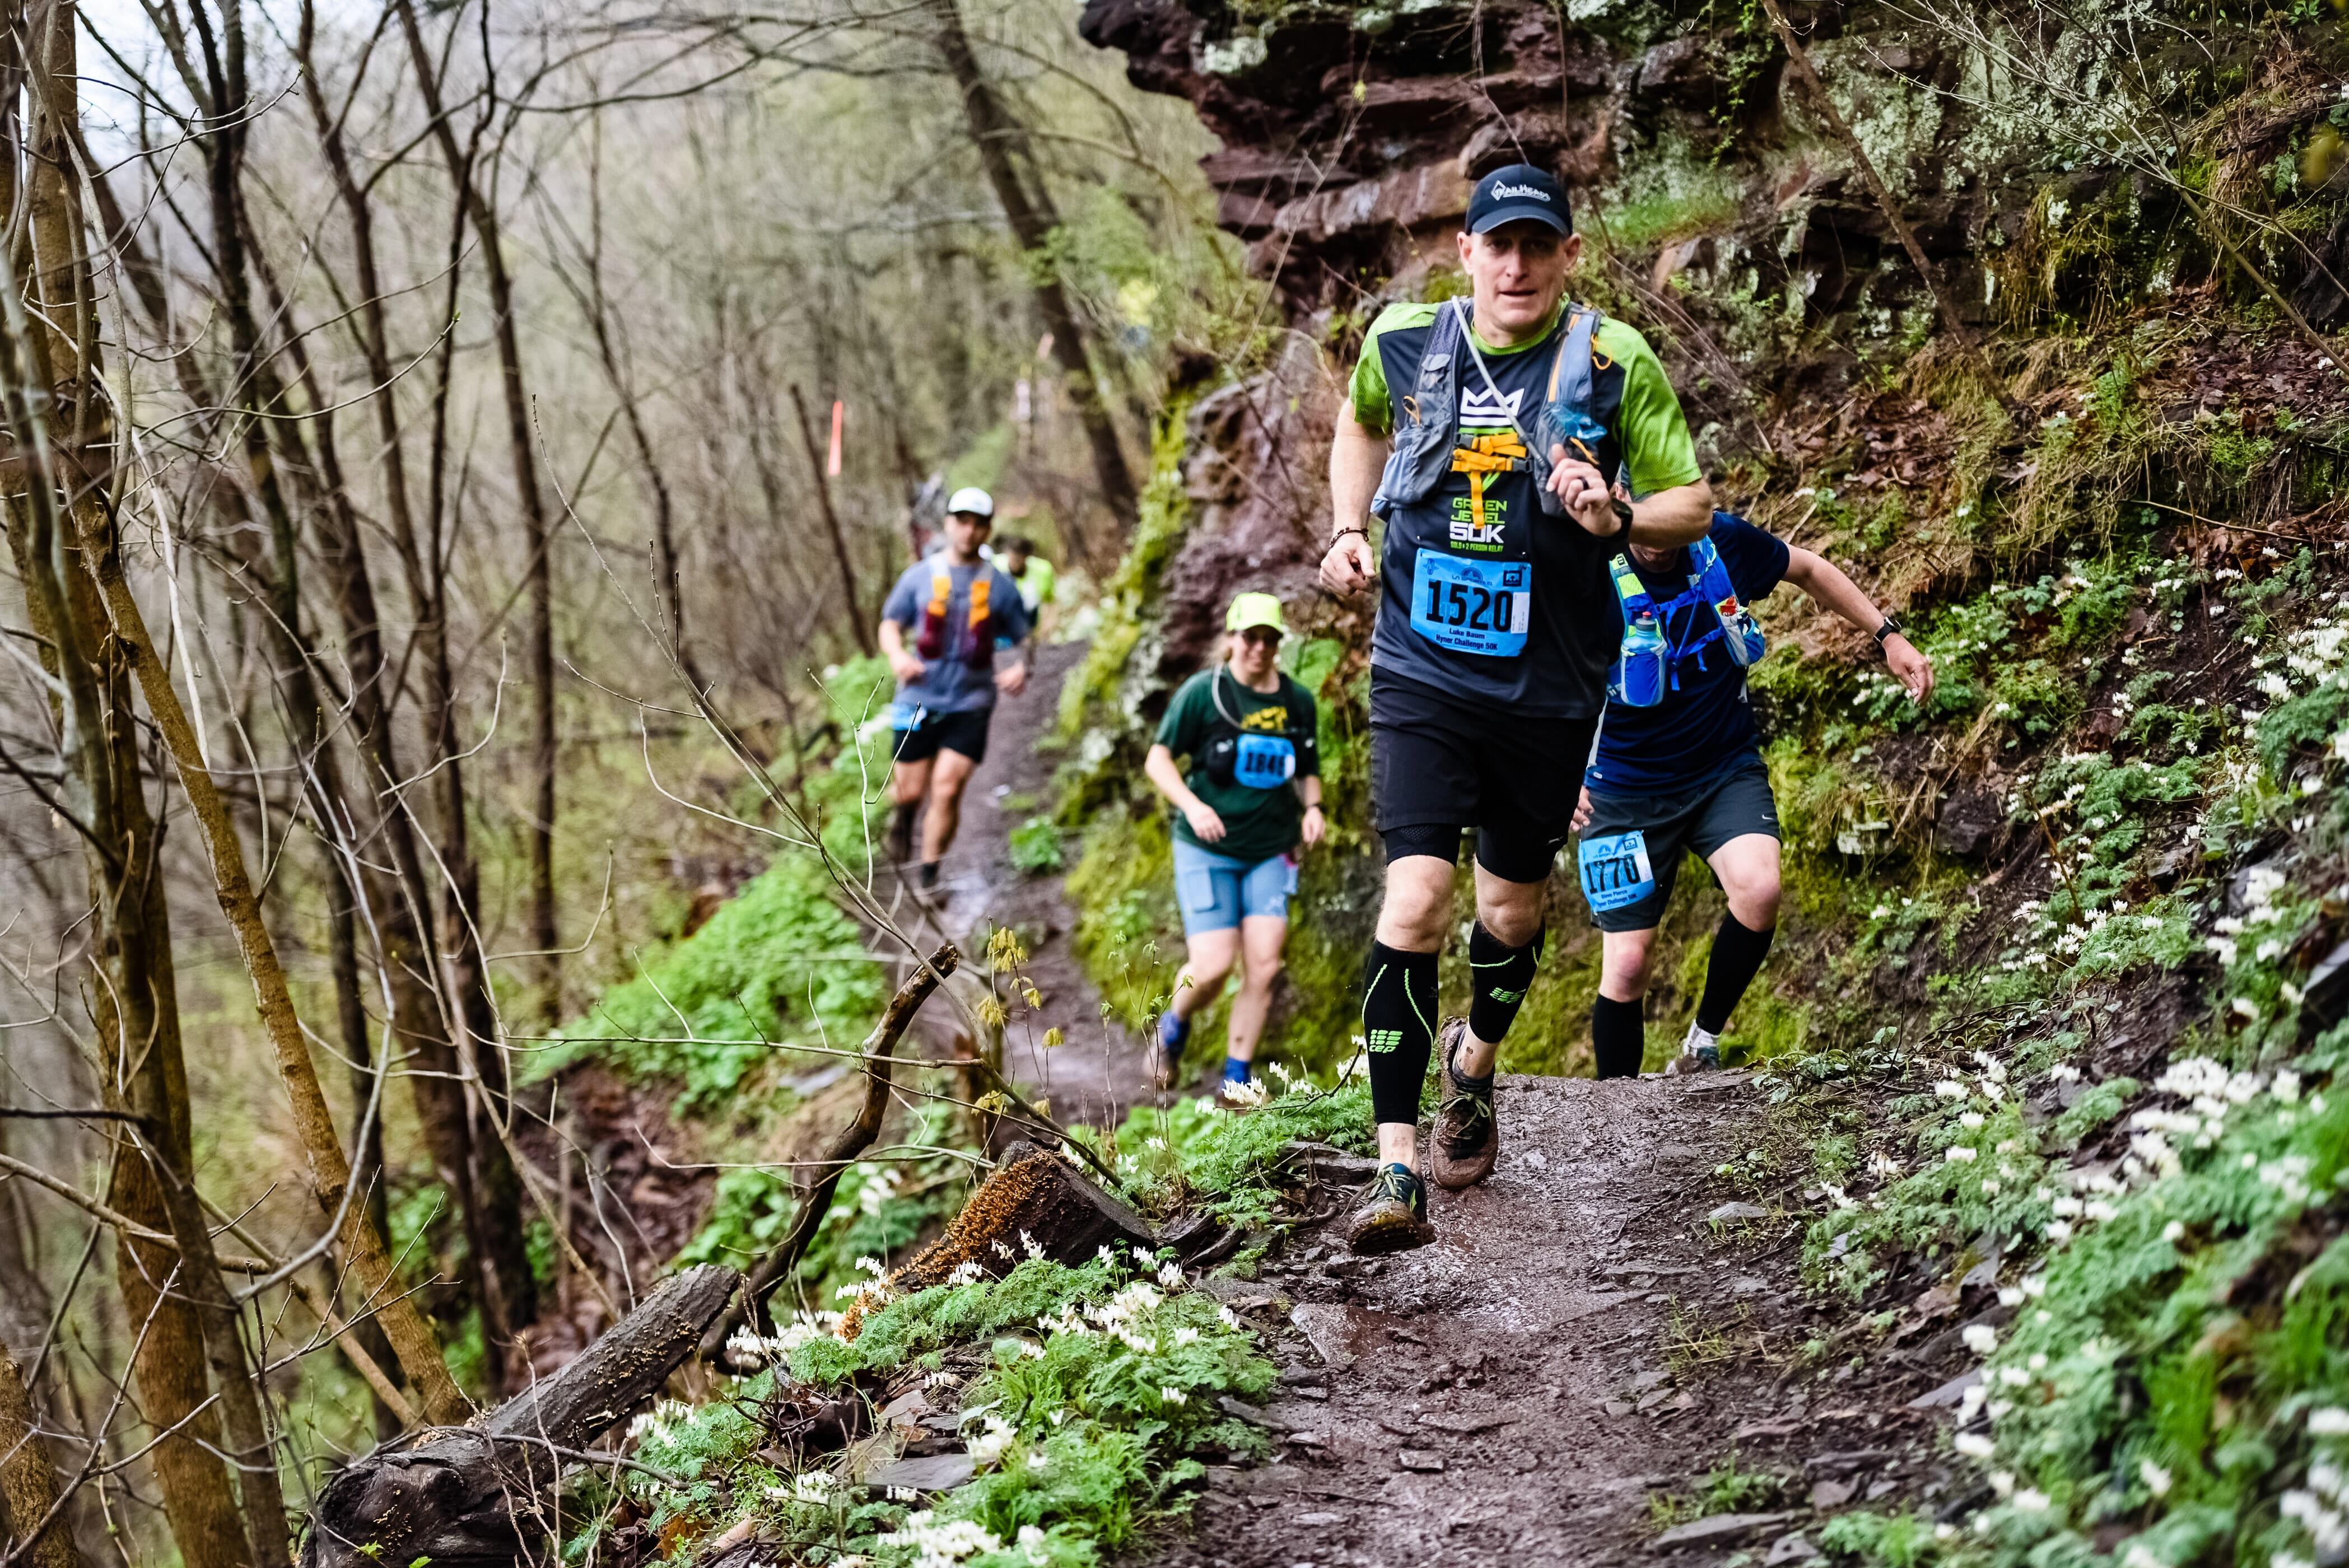 Trail running races occur across the world